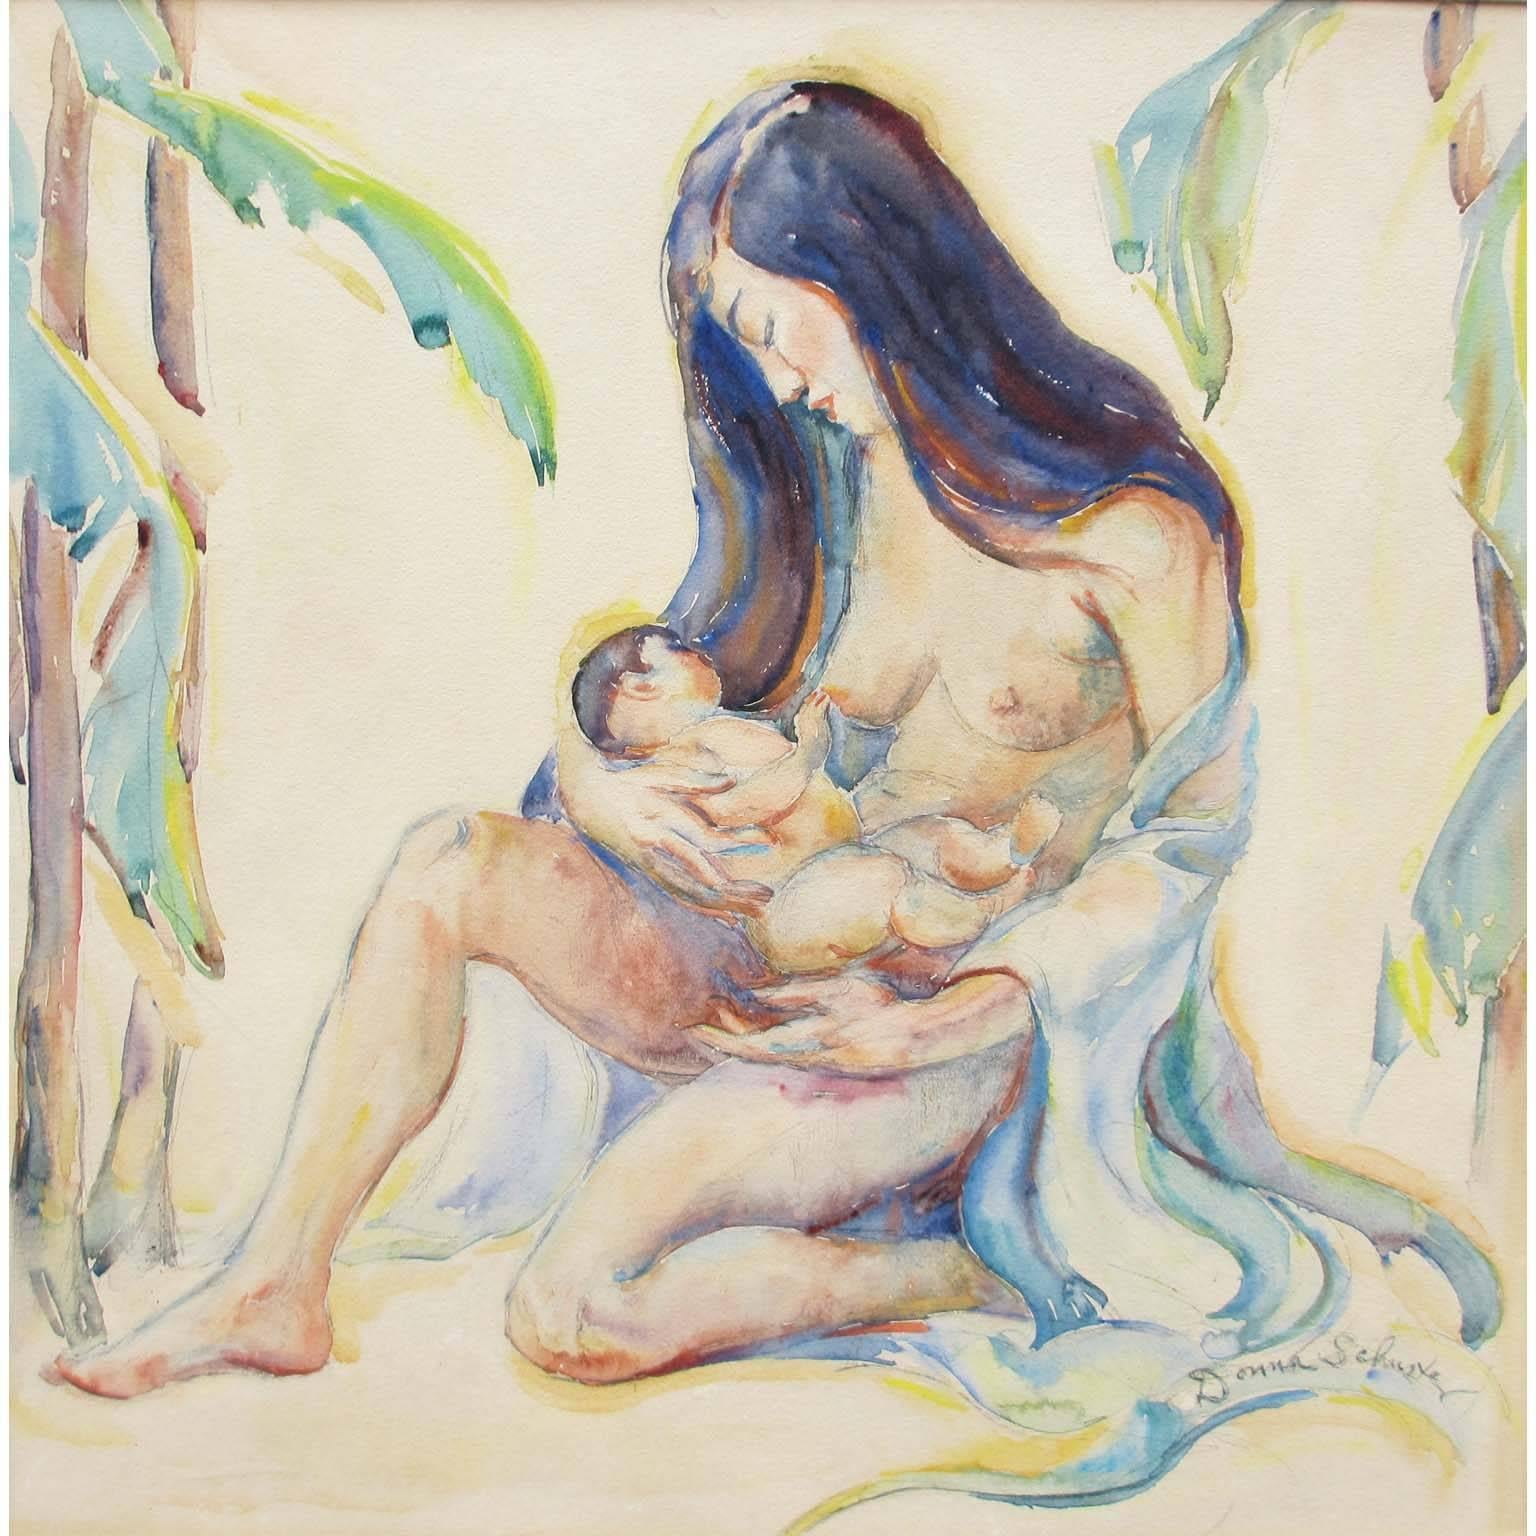 Donna schuster (1883-1953) “Mother and Child” watercolor, pencil and gouache within a giltwood carved frame and protective glass. Signed ‘Donna Schuster’ (Lower Right), circa 1920-1930.

Donna Norine Schuster was born in Milwaukee, Wisconsin on